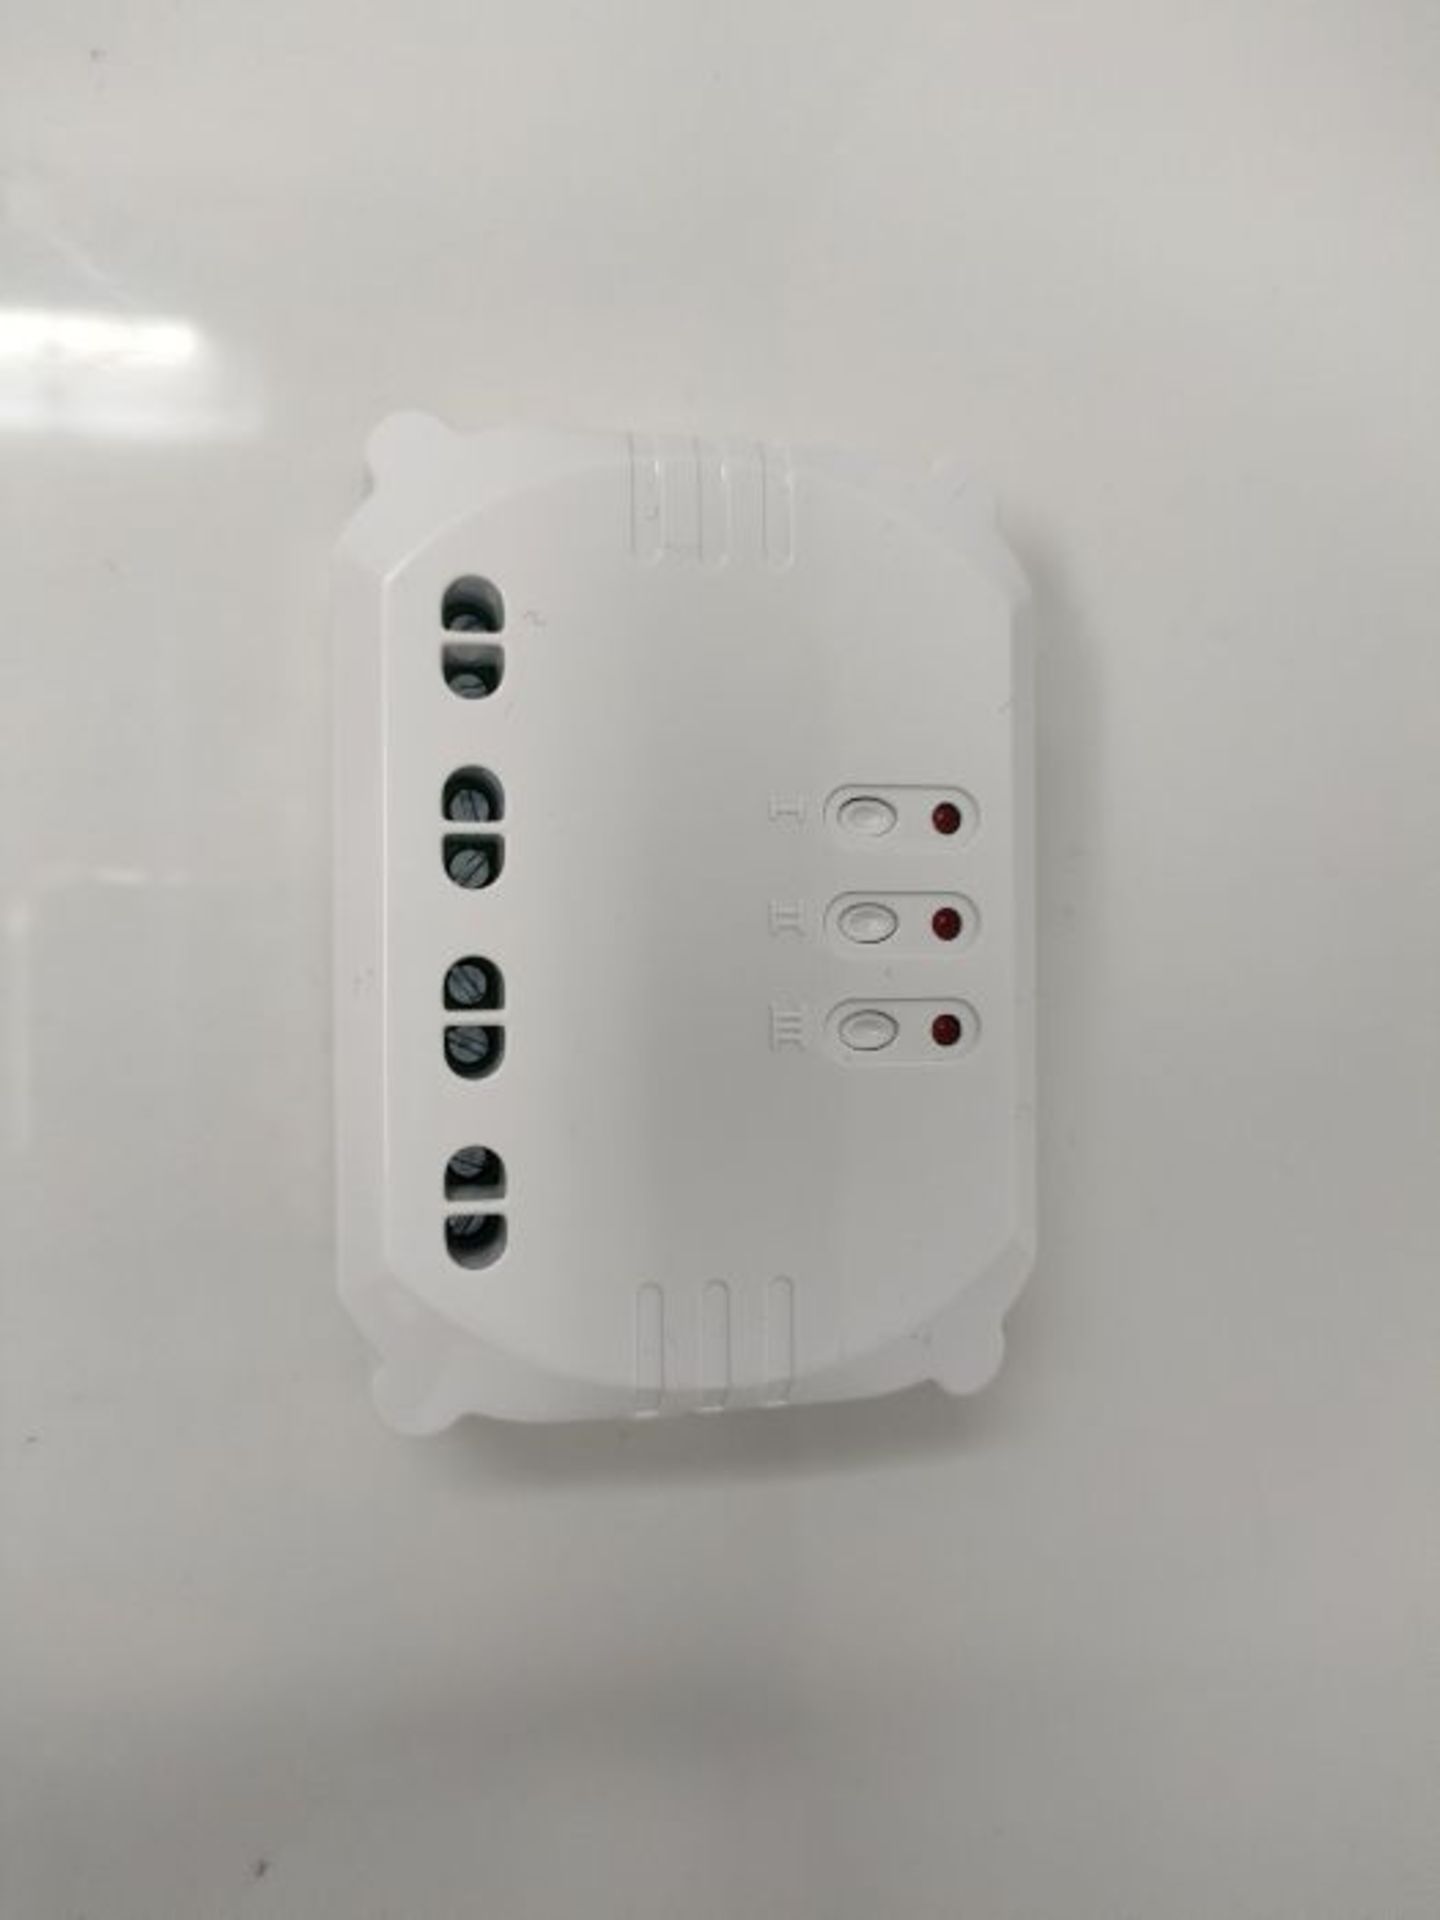 Trust Smart Home ACM-3500-3 Built-In 3-in-1 Switch for Wireless Light Switching - Image 3 of 3